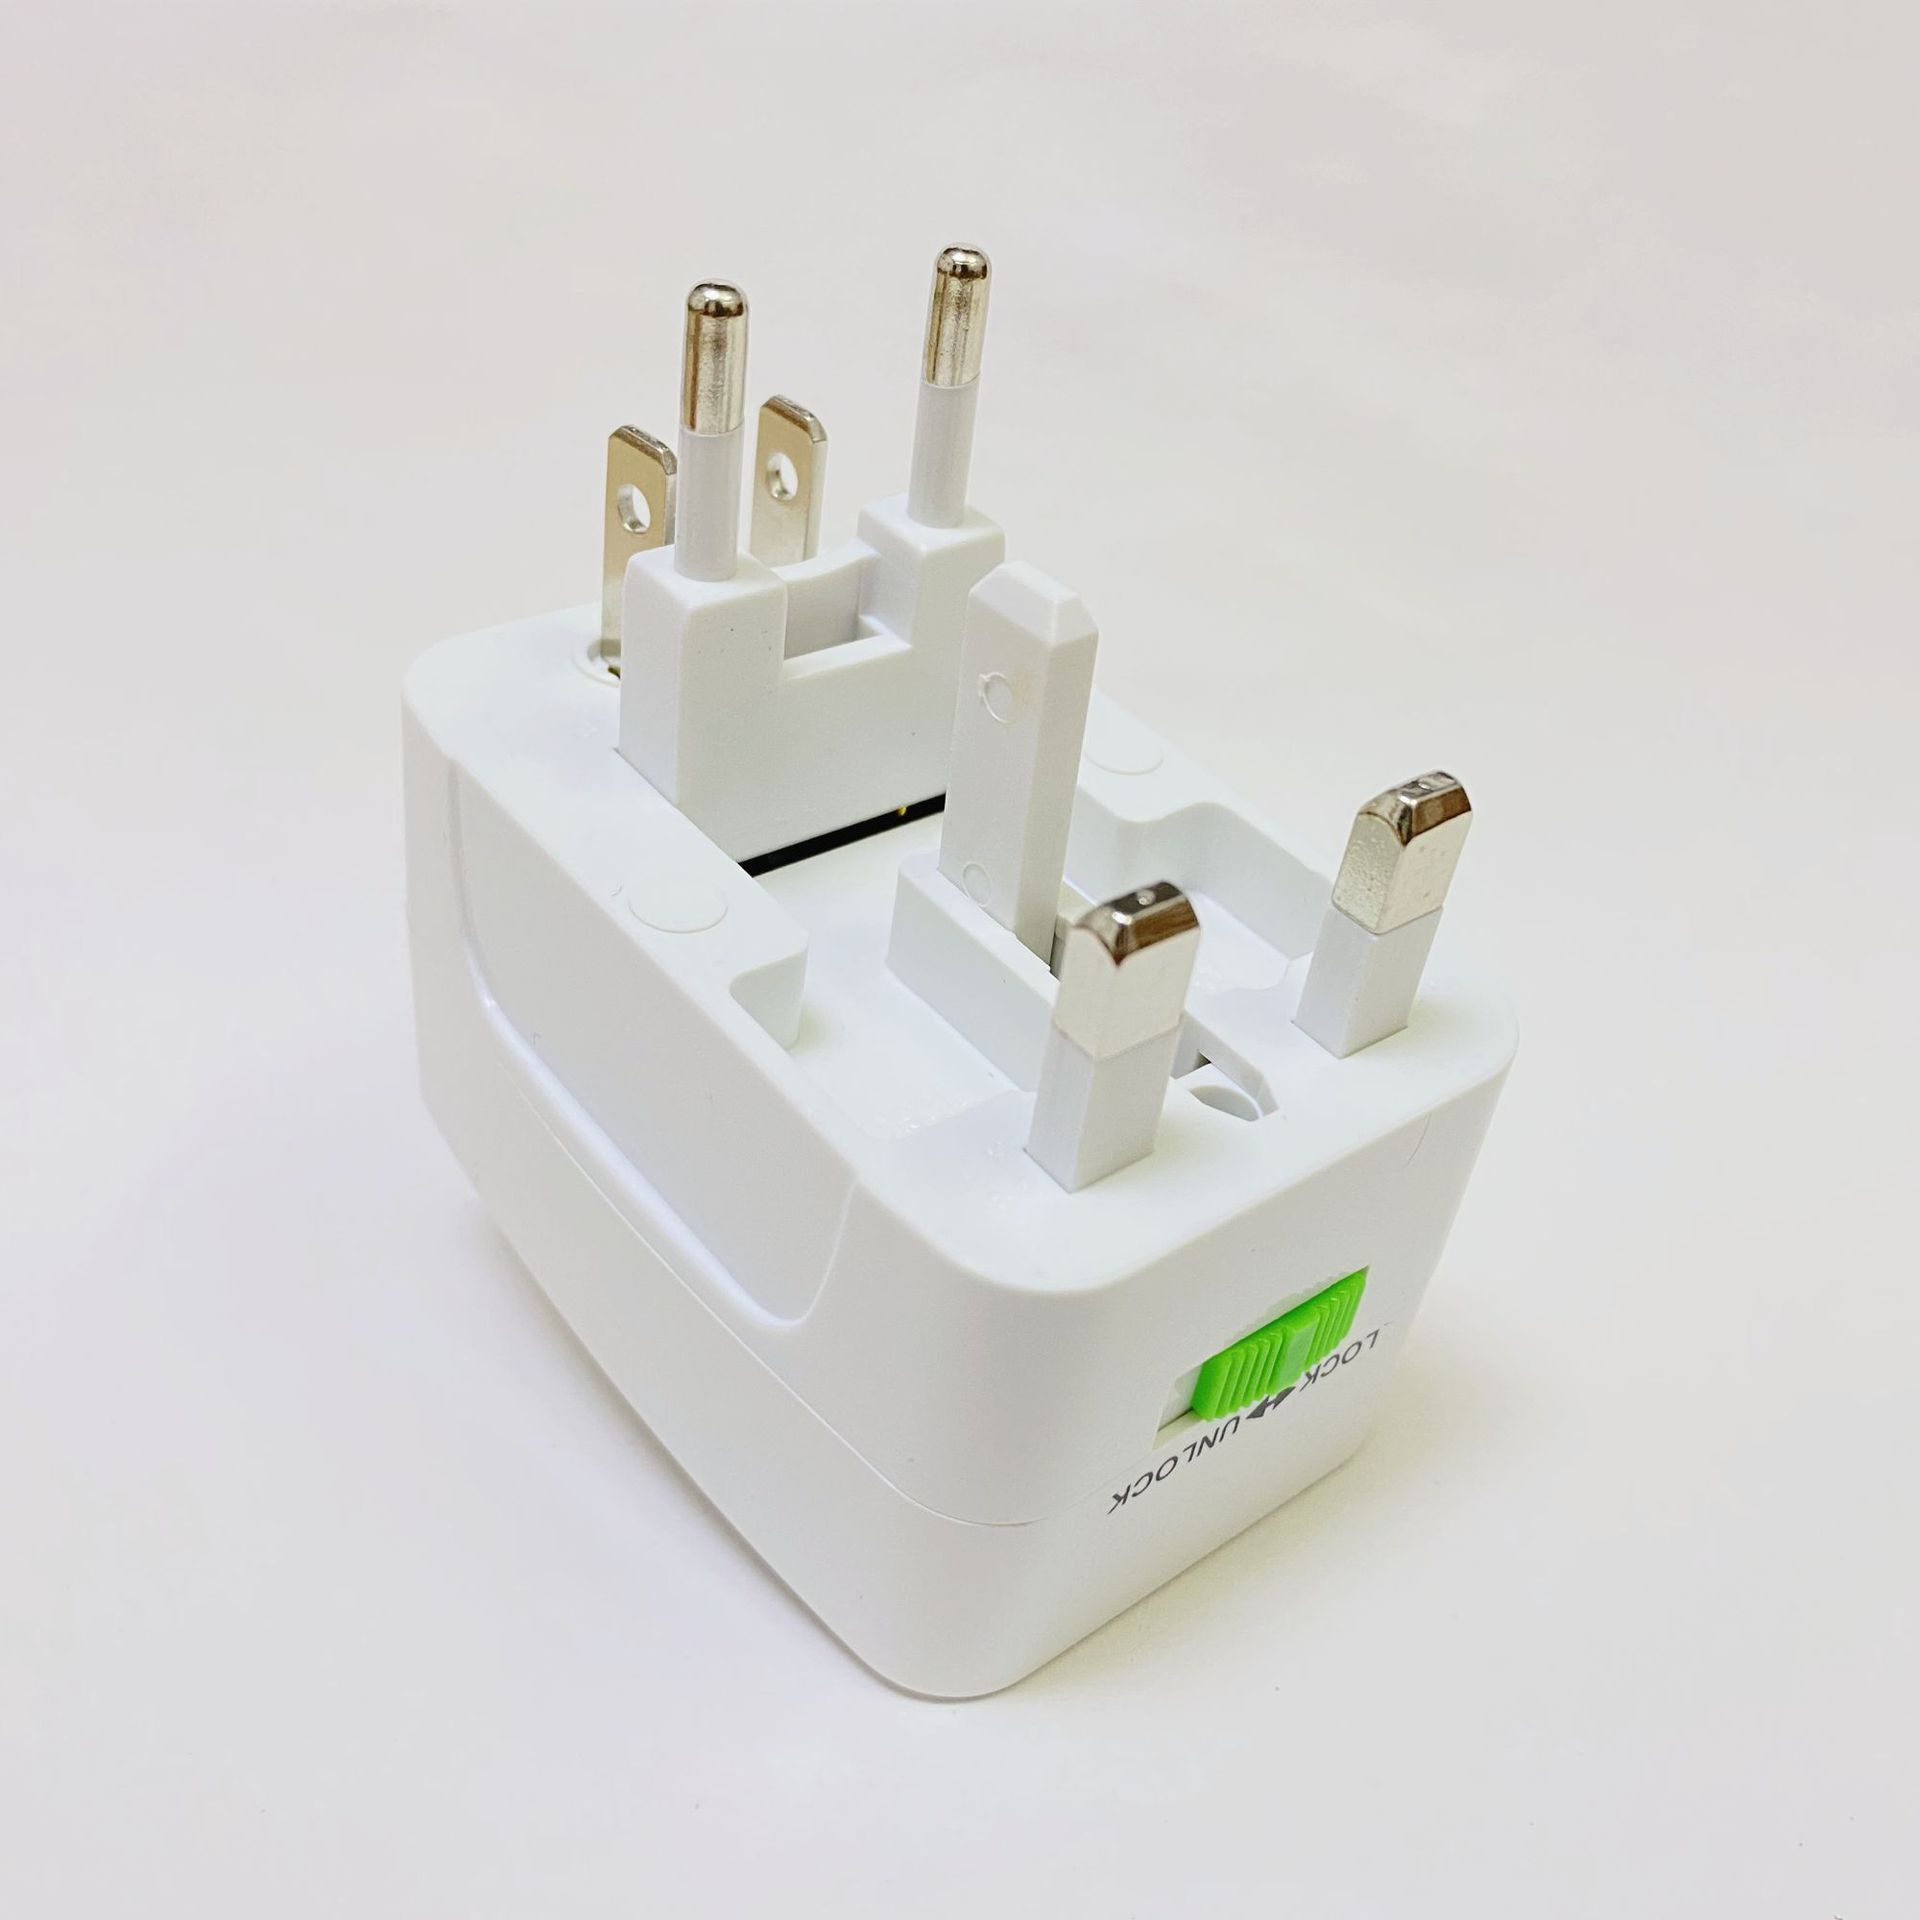 All in One World Universal AC Power Converter Adapter International Adapter Plud Extension US UK Extension by DHL/FedEx/UPS